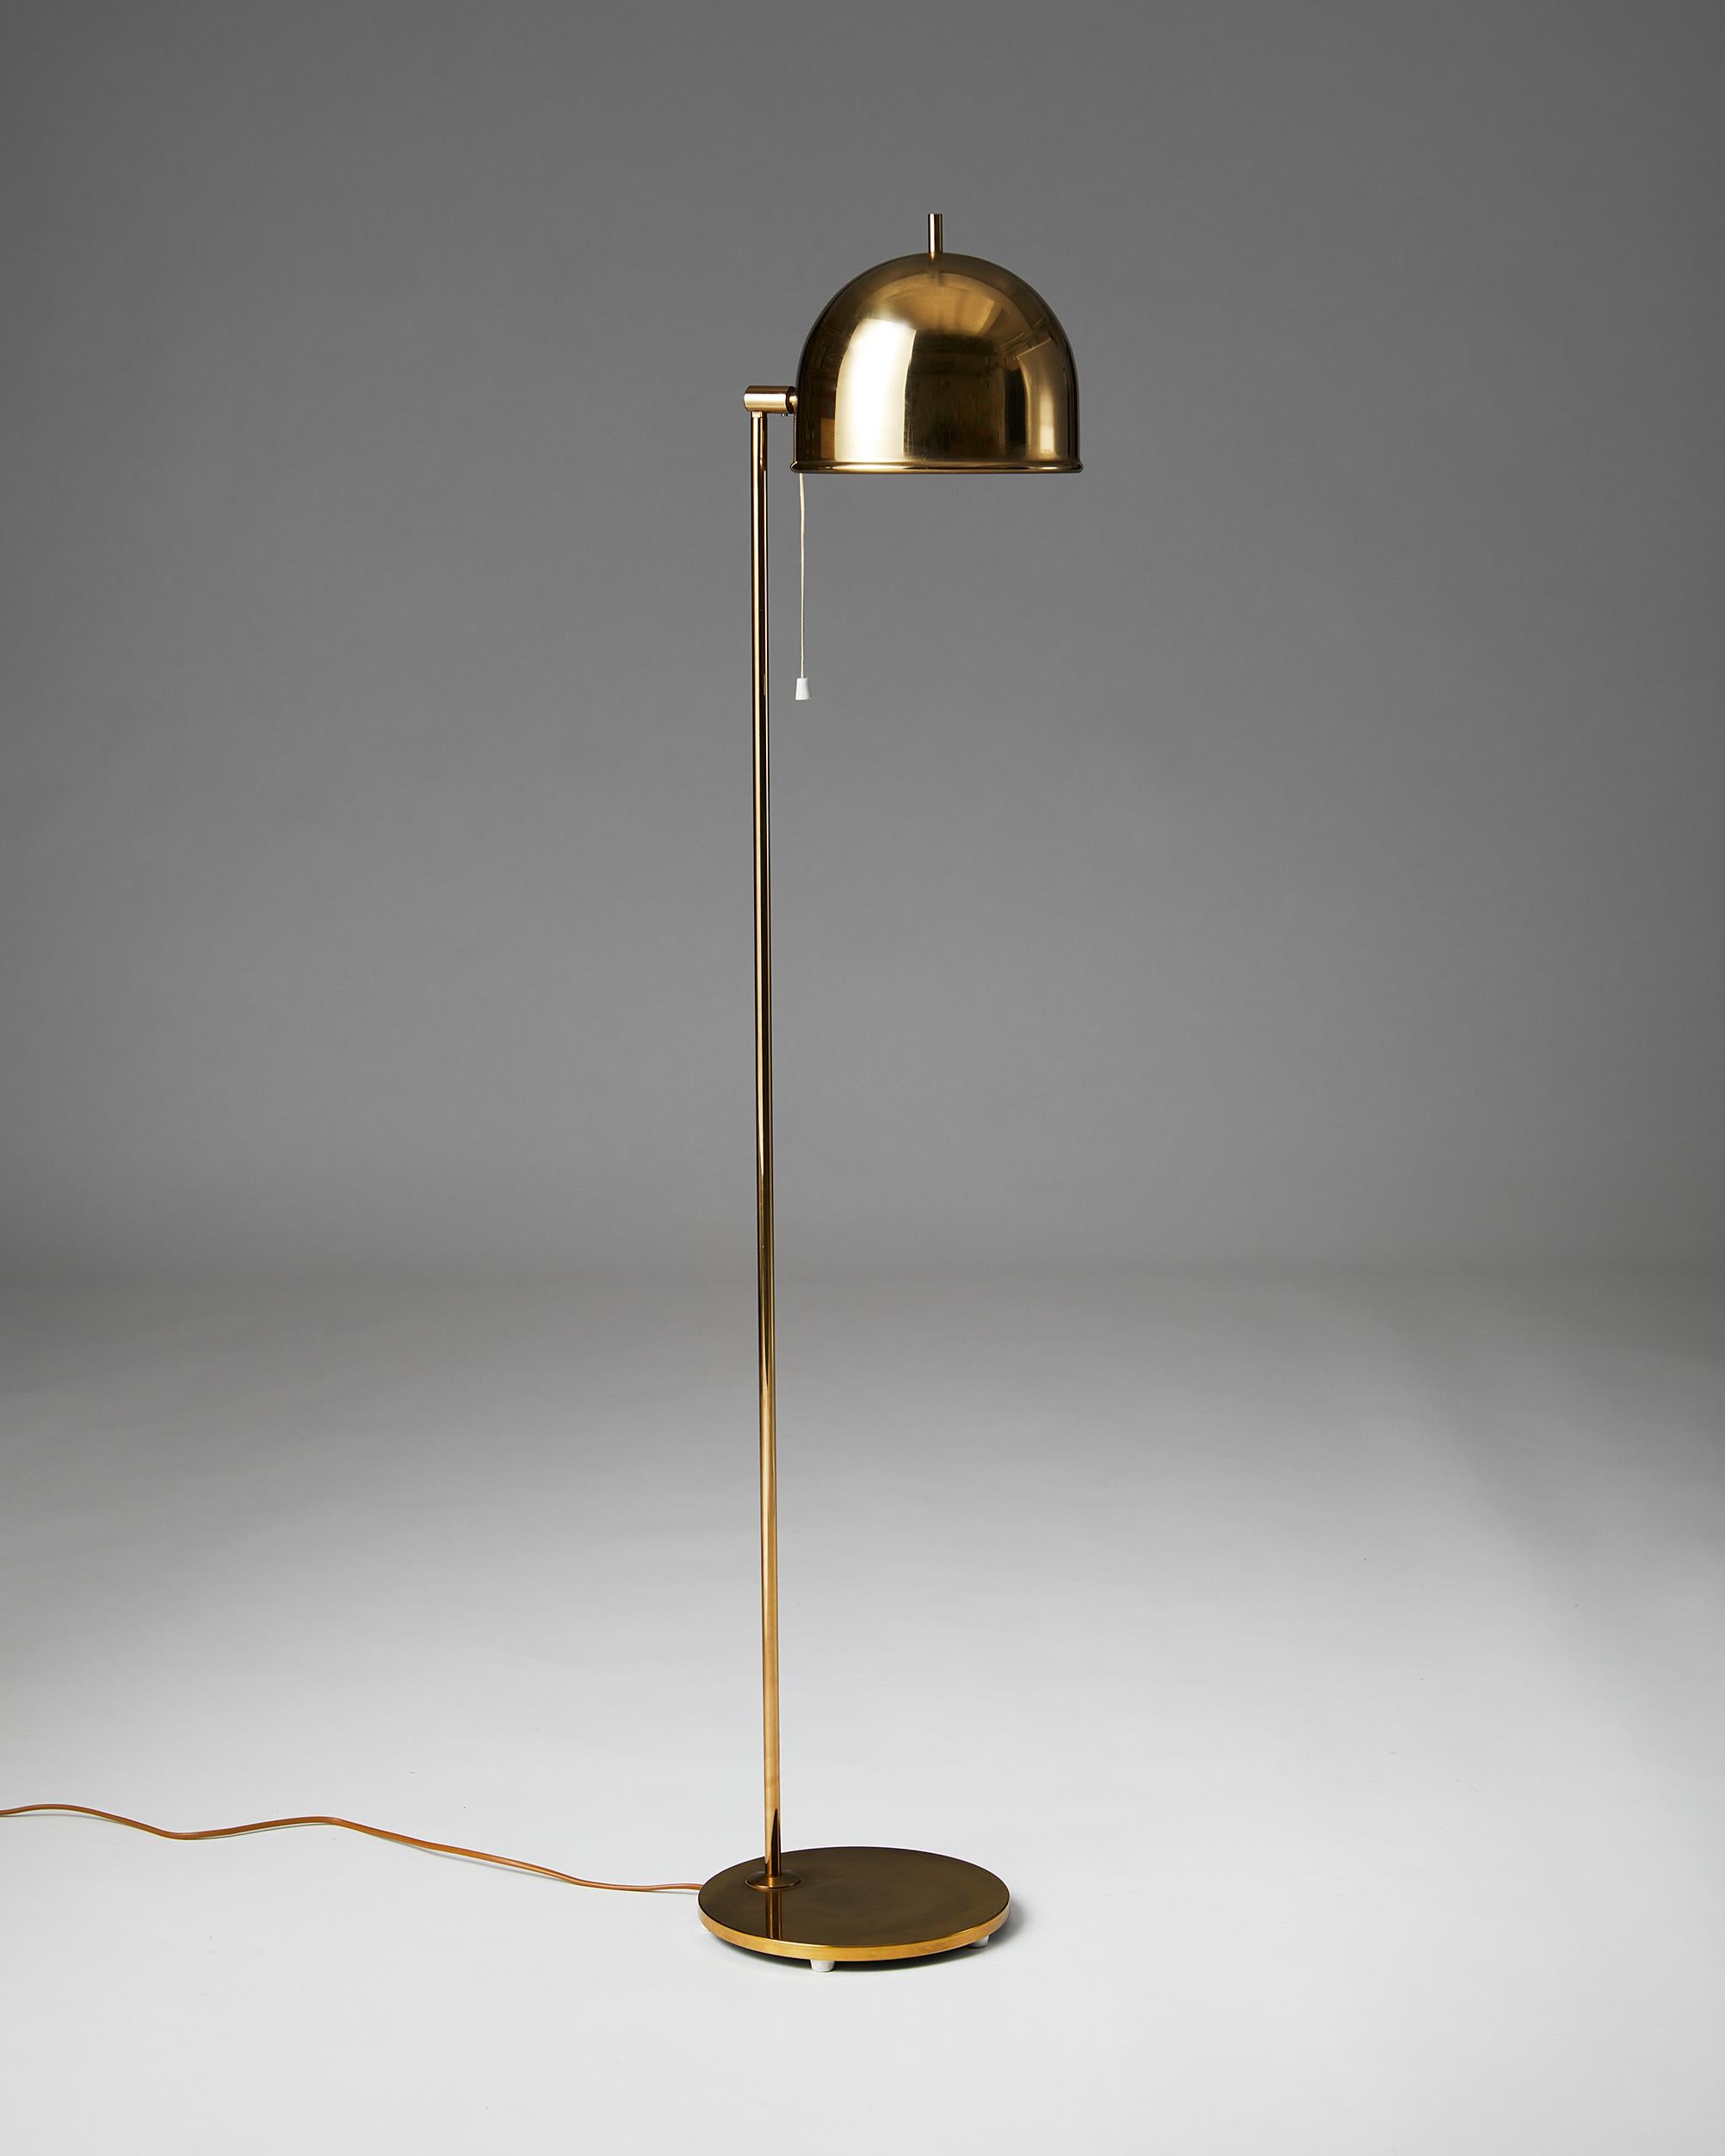 Brass.

Measures: Height: 137 cm/ 4' 6''
Diameter of lampshade: 21 cm/ 8 1/4''

This floor lamp with fully adjustable shade was manufactured in brass by Bergboms and designed by Eje Ahlgren. The protruding brass rod at the top of the shade is